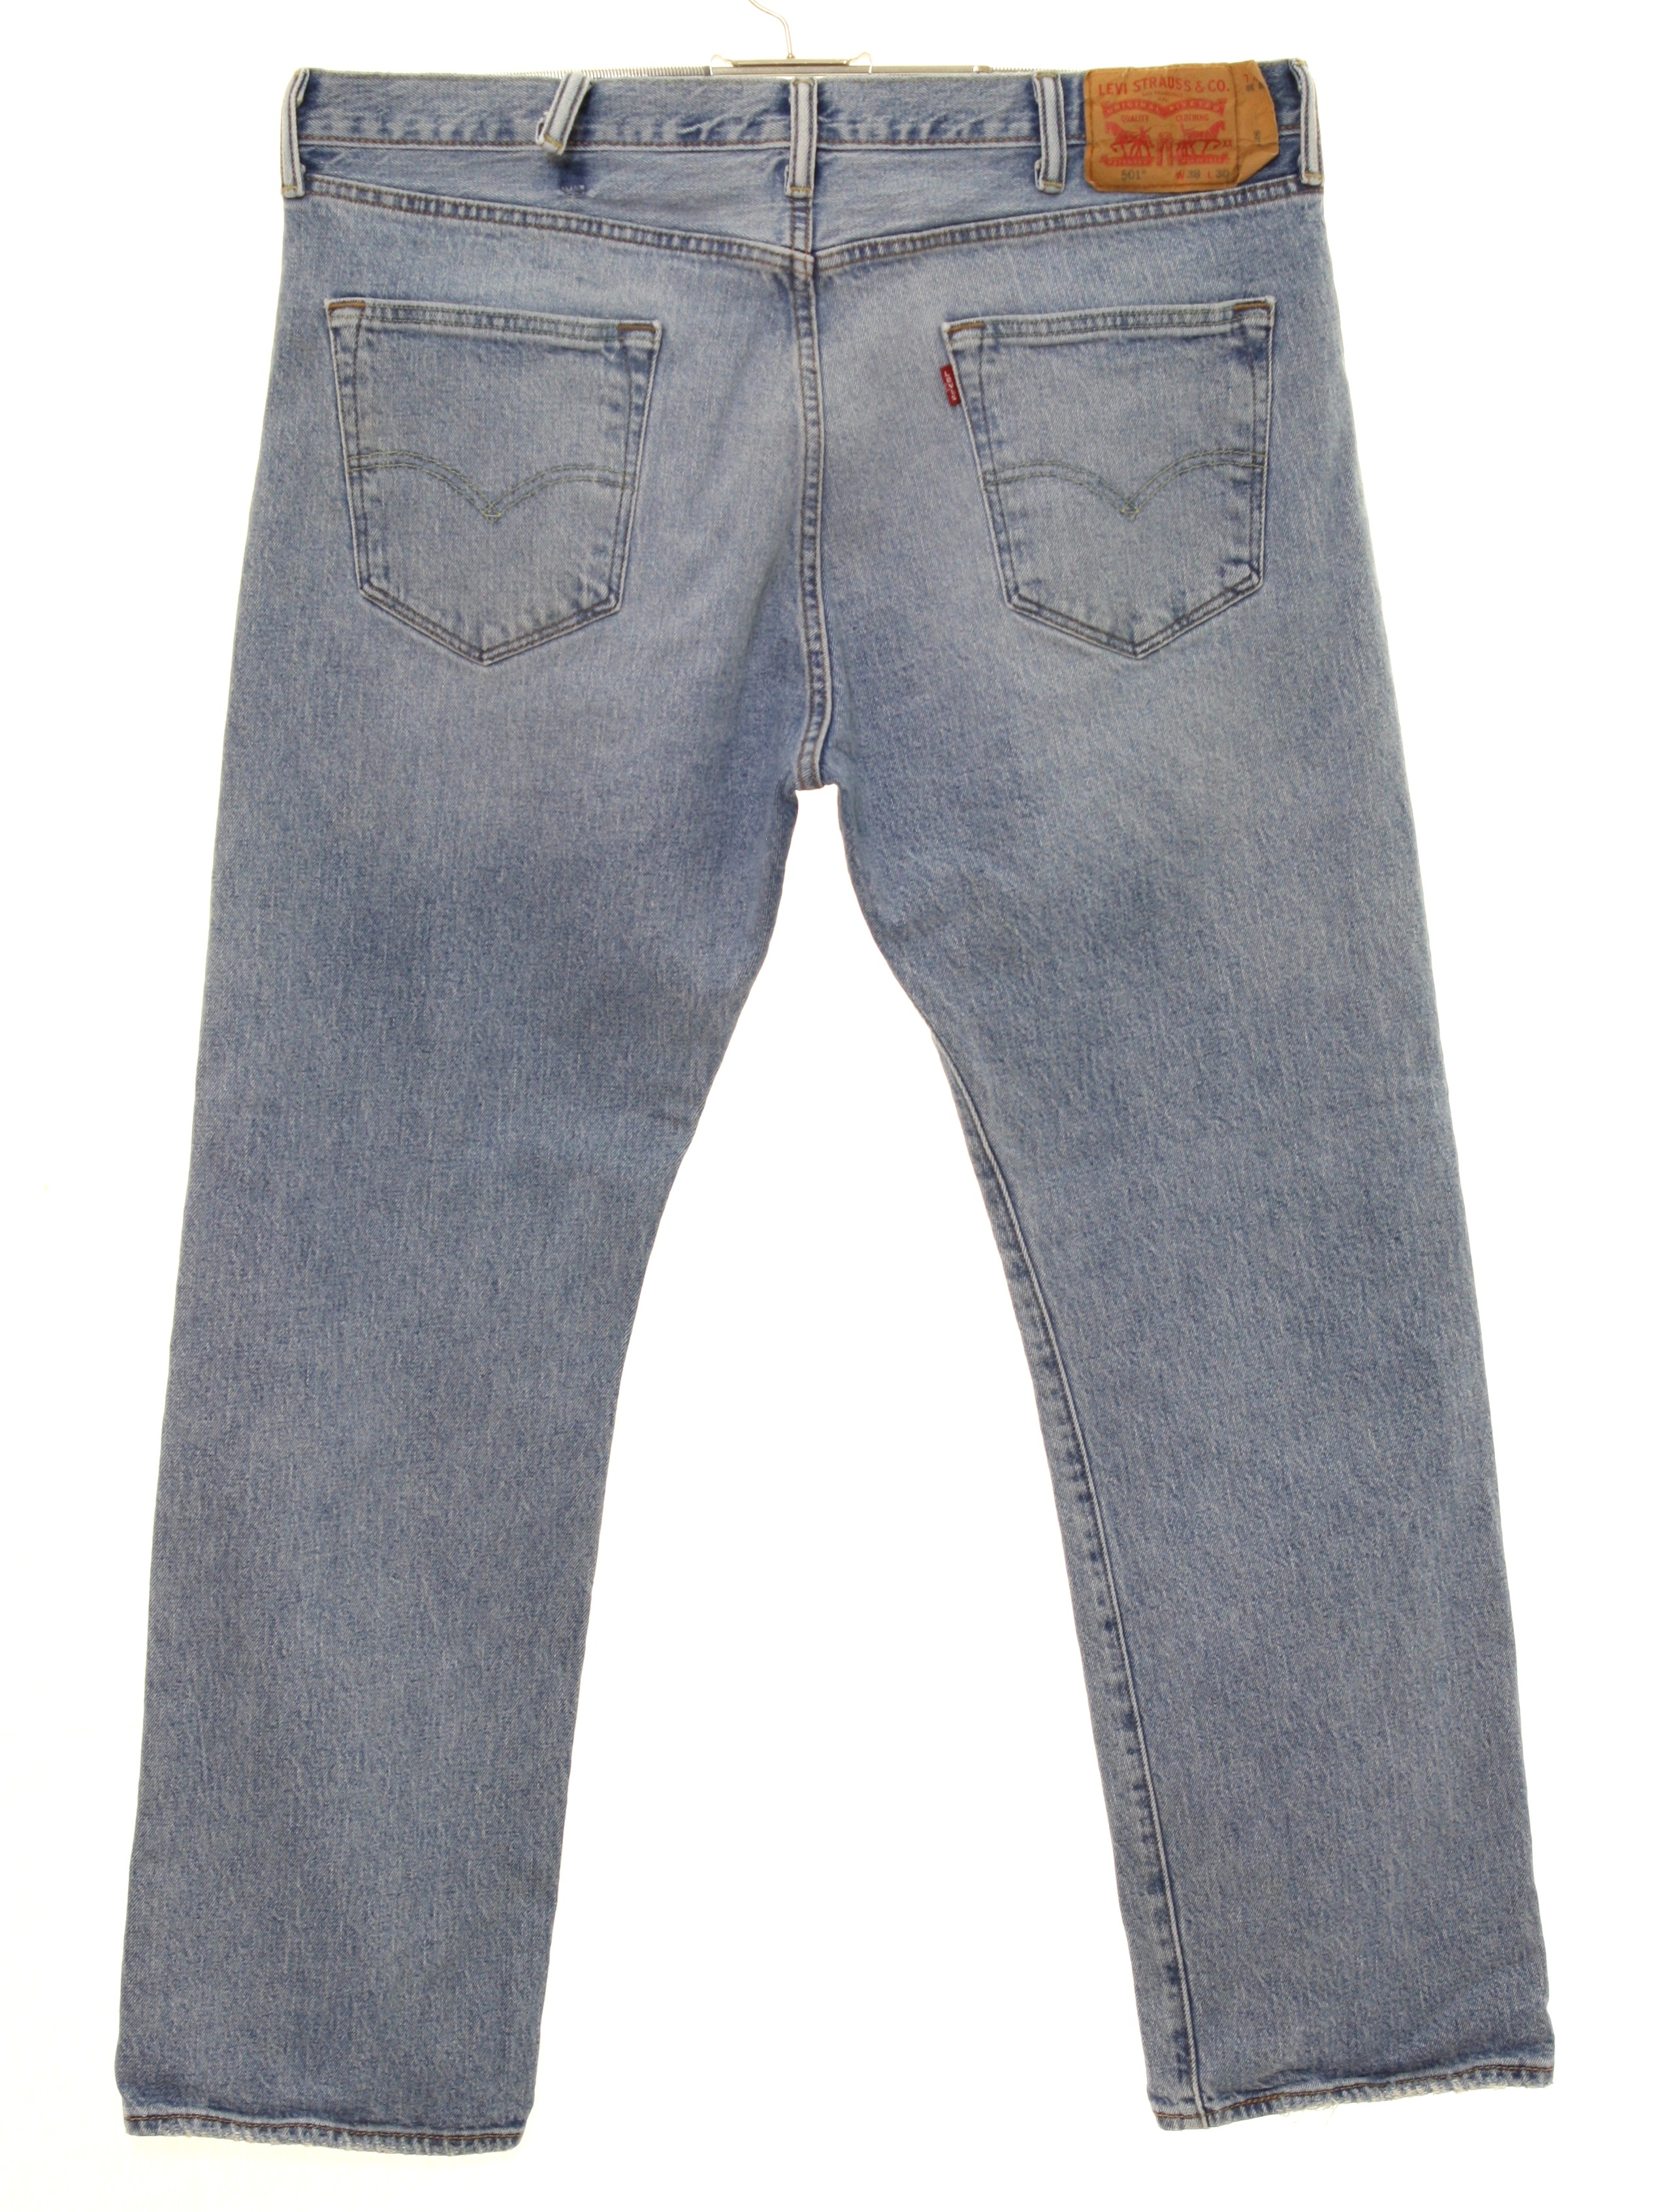 Retro 1990's Pants (Levis 501) : 90s -Levis 501- Mens heavily faded and ...